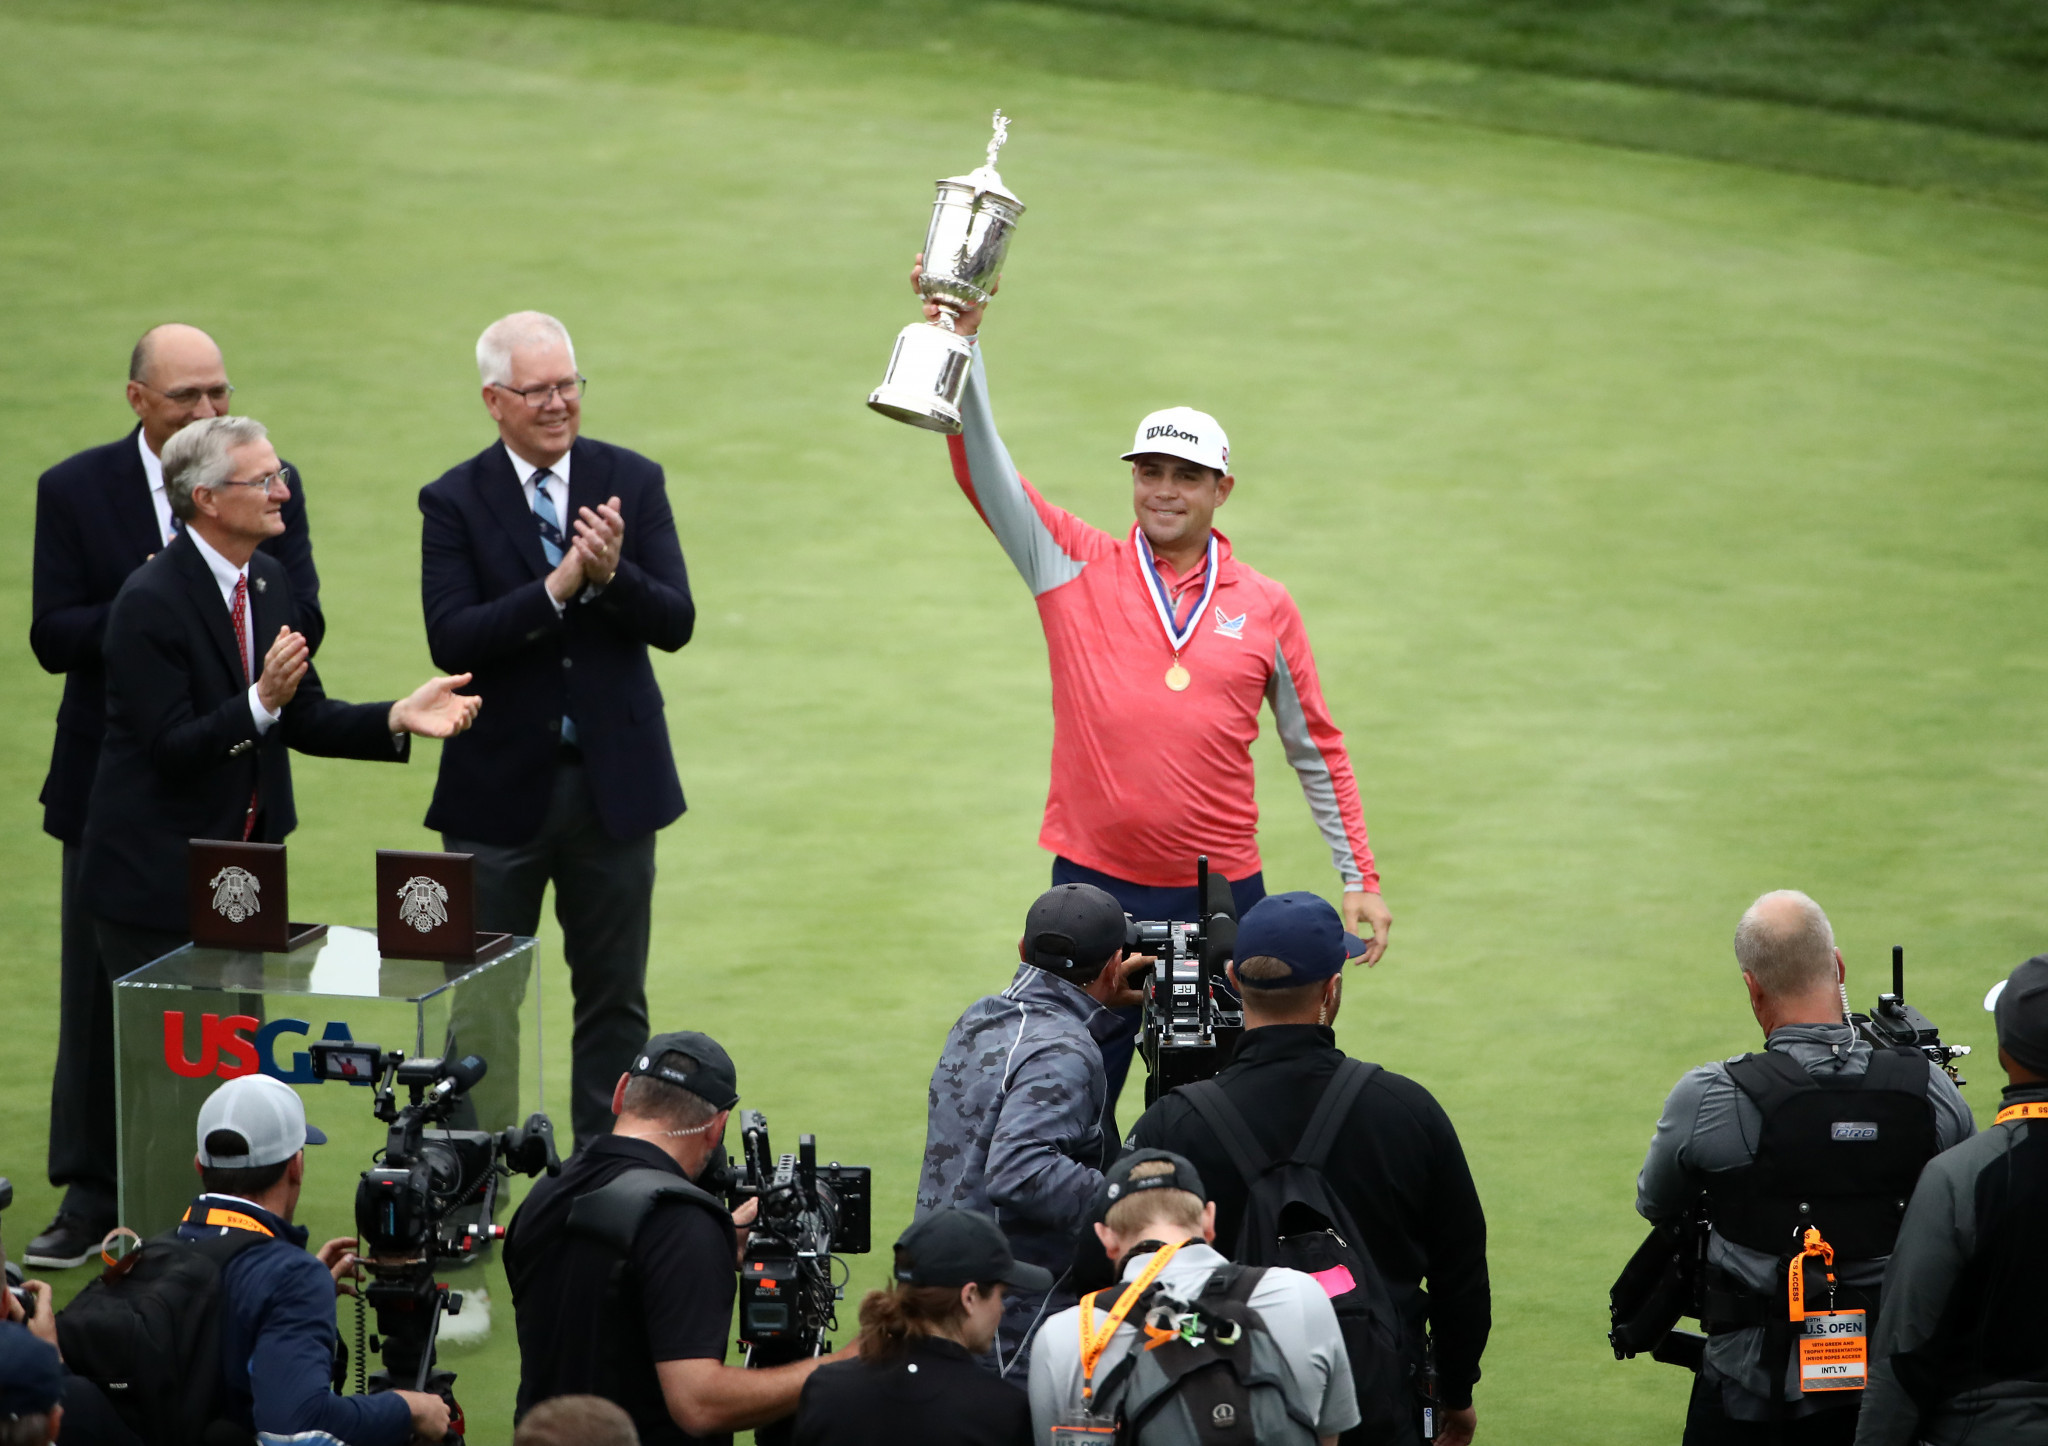 Gary Woodland won the US Open in 2019 ©Getty Images